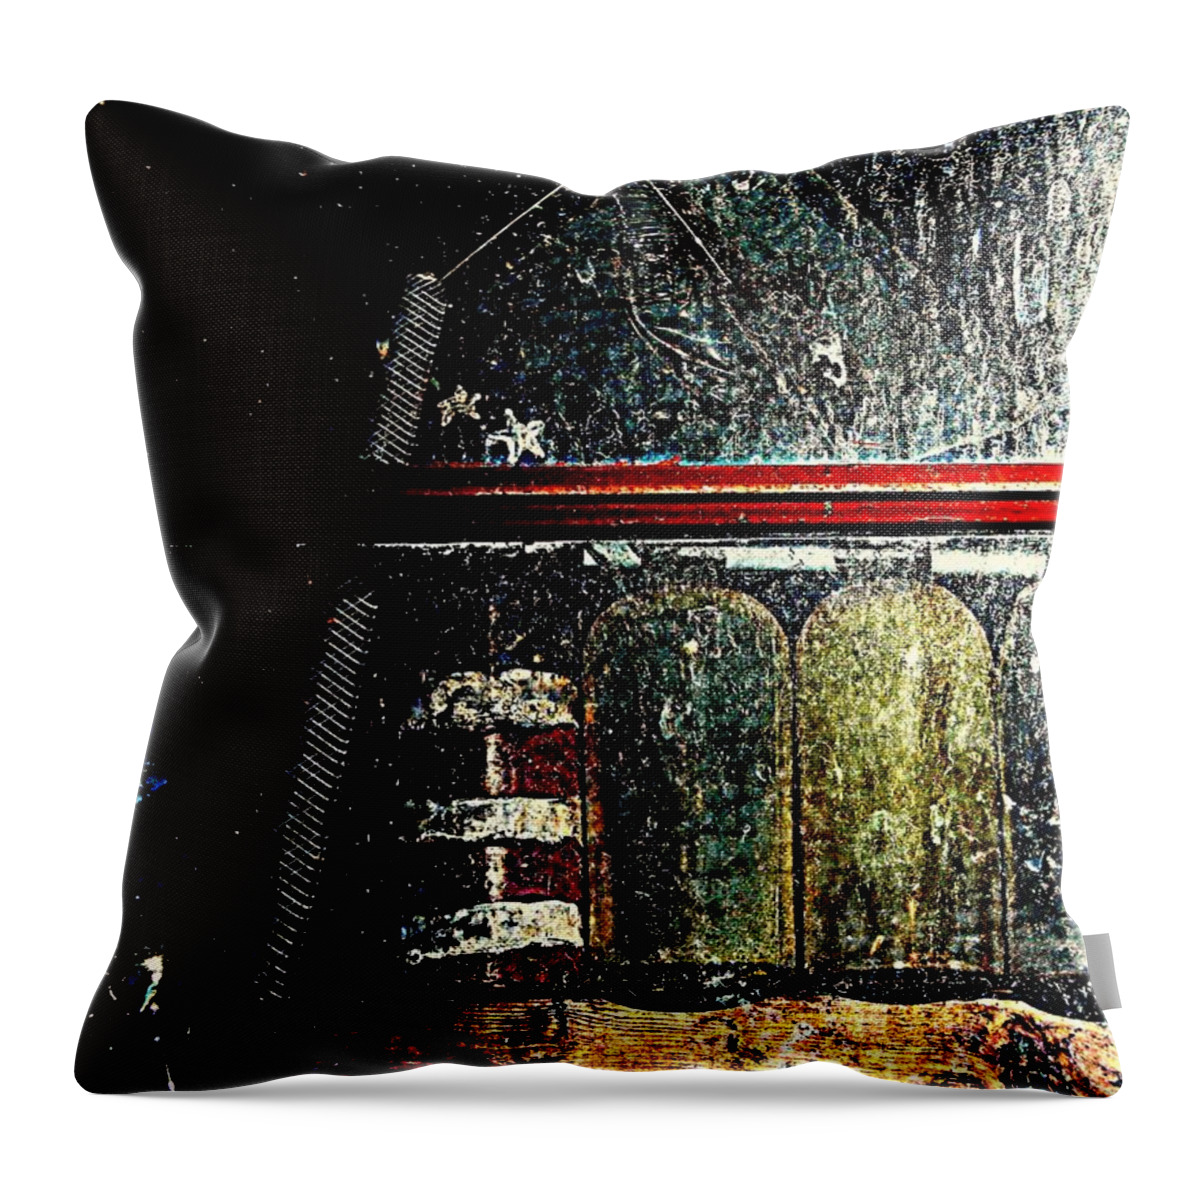 Still Life Throw Pillow featuring the photograph Glass Stash by Cleaster Cotton